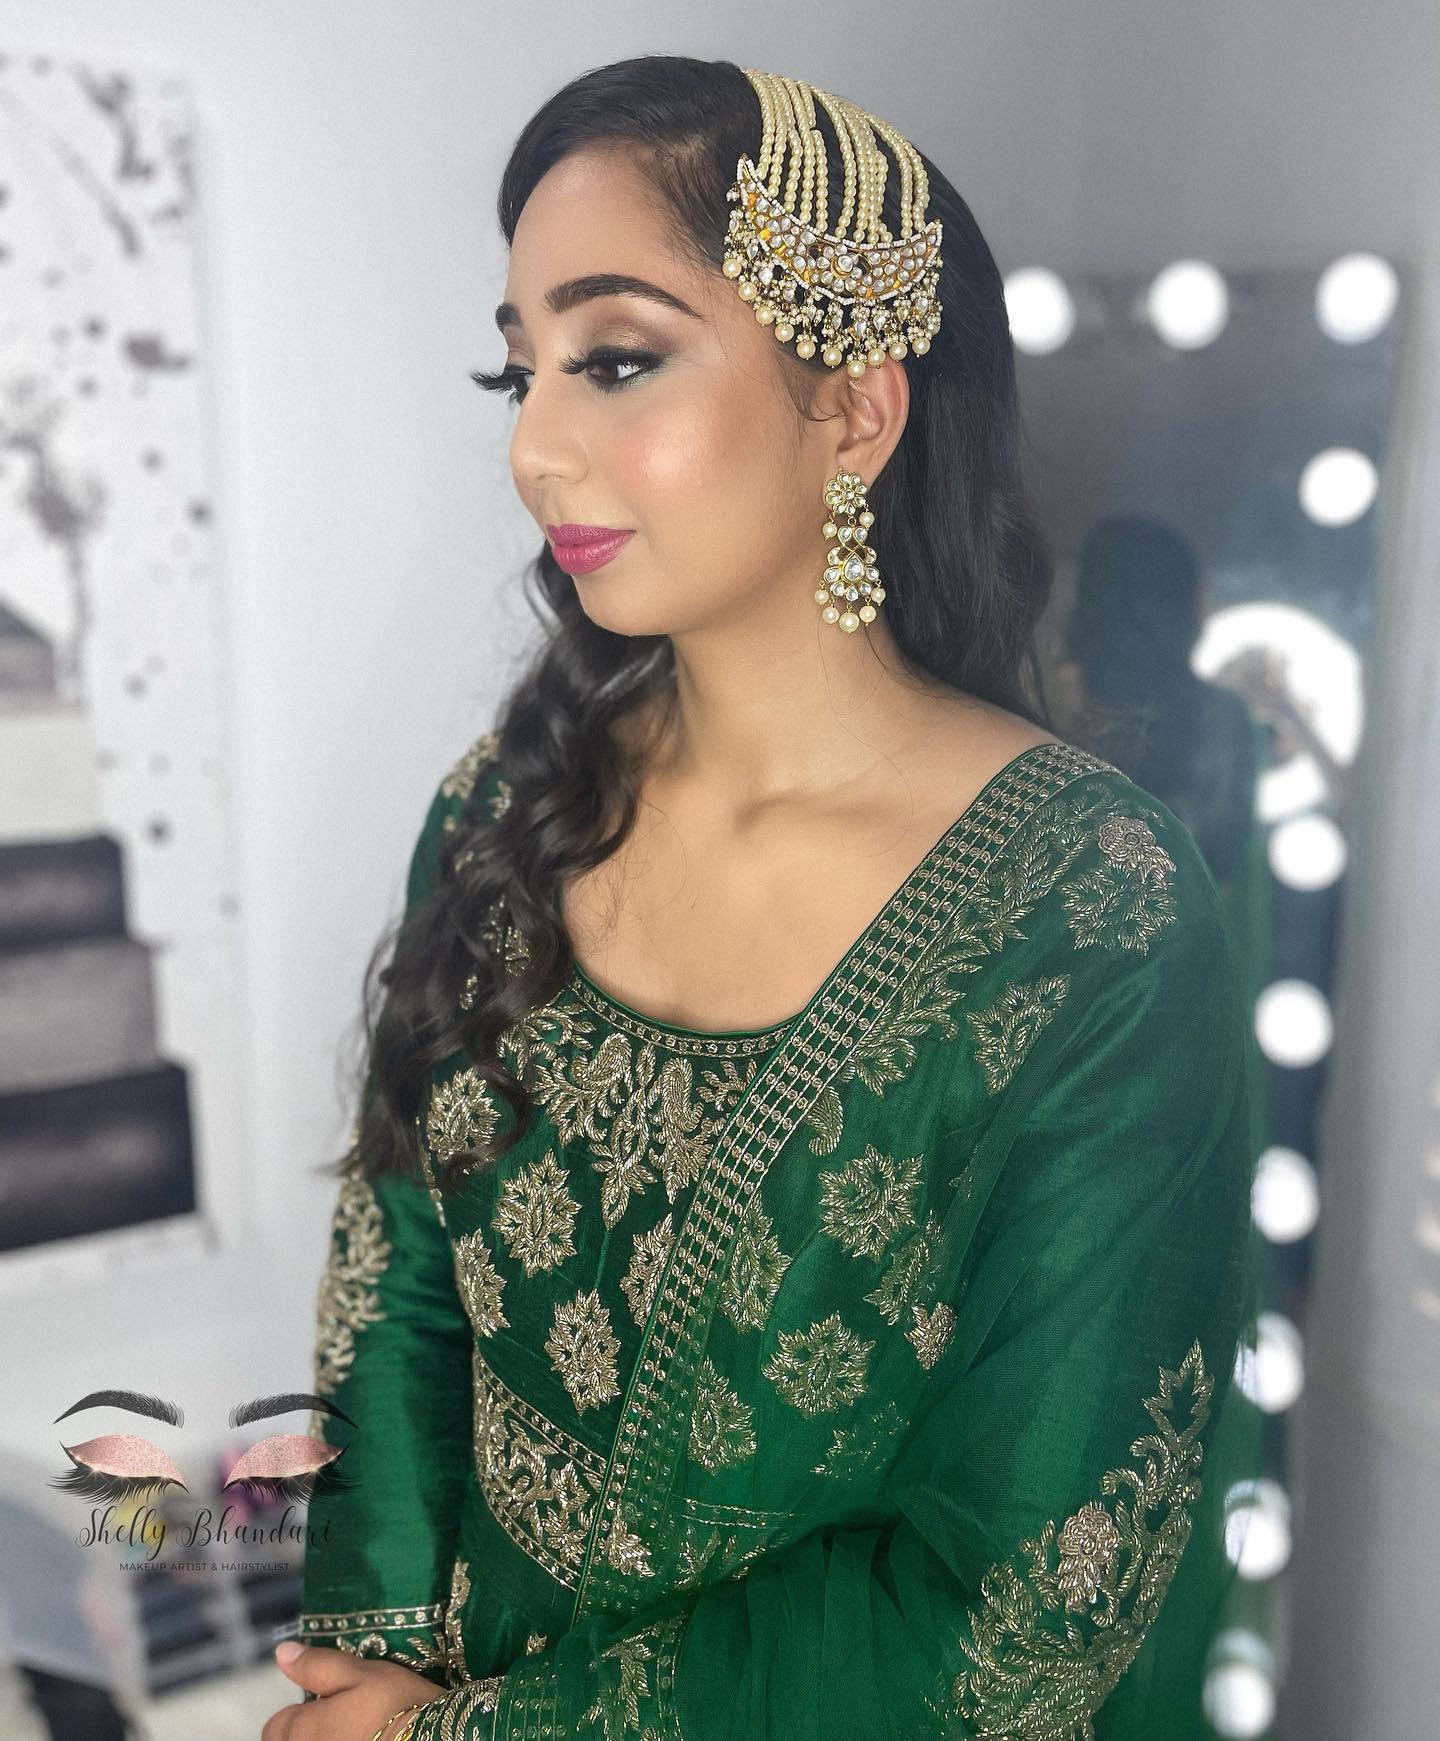 ✨P R A B H✨

💄Makeup and hair for @prabh_kb … have loved glamming this lovely girl up over the years! Thank you gorgeous for trusting me over and over again xx
———————————————————————————
❗️Taking all 2022/2023 bridal and 2022 non-bridal bookings! Secure a booking for your next event via the link in my bio.
———————————————————————————
❗️1:1 Personal Makeup Lessons Now Available. Enquire via the website in bio for more information.
———————————————————————————
#makeupartistsydney  #sydneymakeupartist #sydneymakeupartists  #100wattskin #glowyskin #maccosmetics #greenlehenga #bridalmakeup #lehnga #glammakeup #punjabiwedding #partymakeup #weddingmakeup 
 #guestmakeup #maccosmetics #glowingbride #dewyskin #glowingskin #toptags #southasianweddings #mac #esteelauder #glameyes #ootd #photoshoot #instafashion #sangeet #receptionguest #makeup #greensuit #partyglam